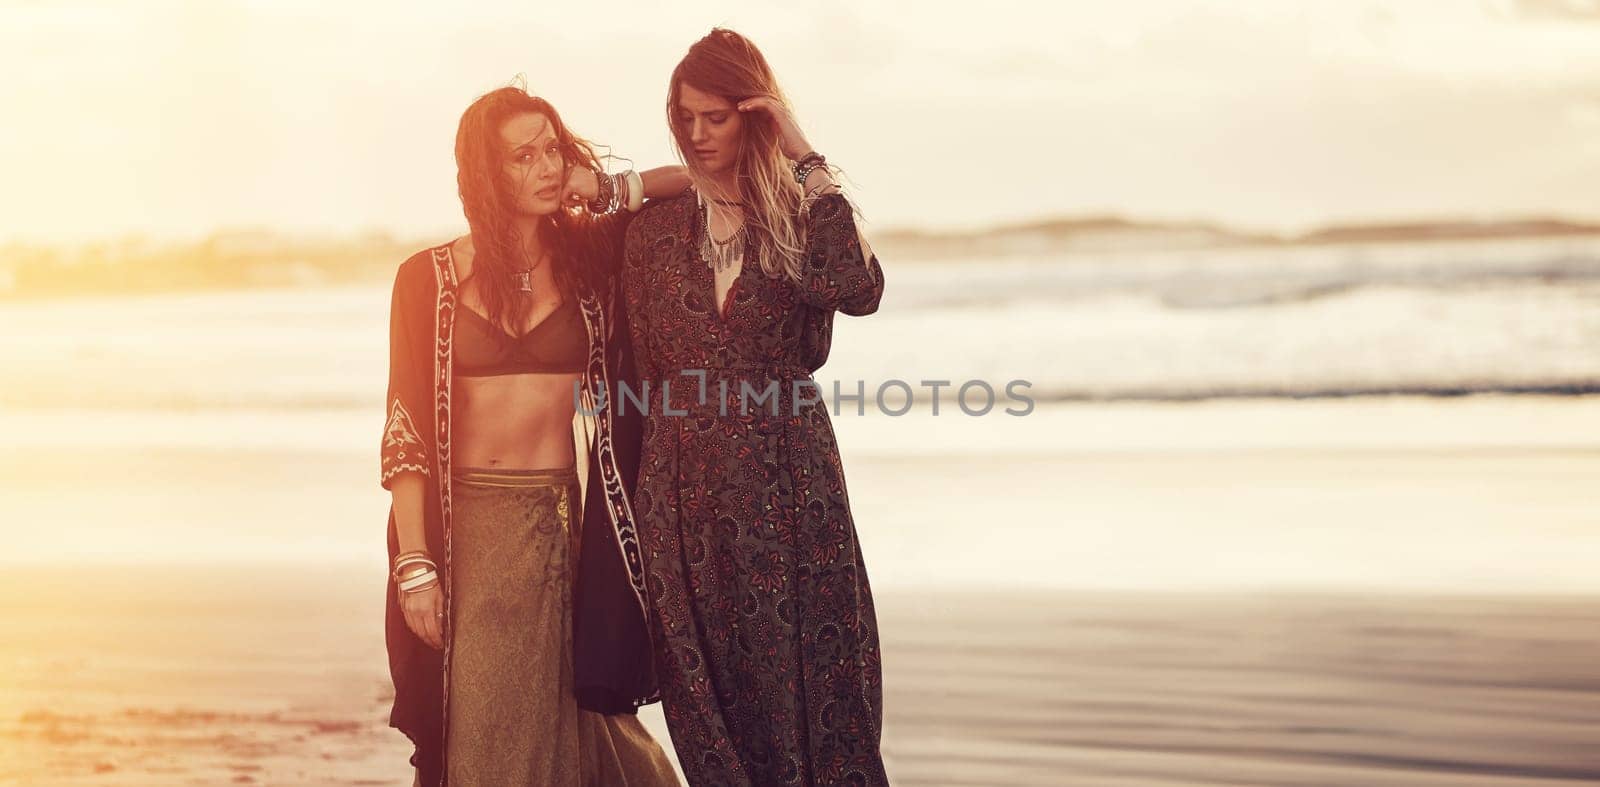 Style has nothing to do with fashion. two young women spending the day at the beach at sunset